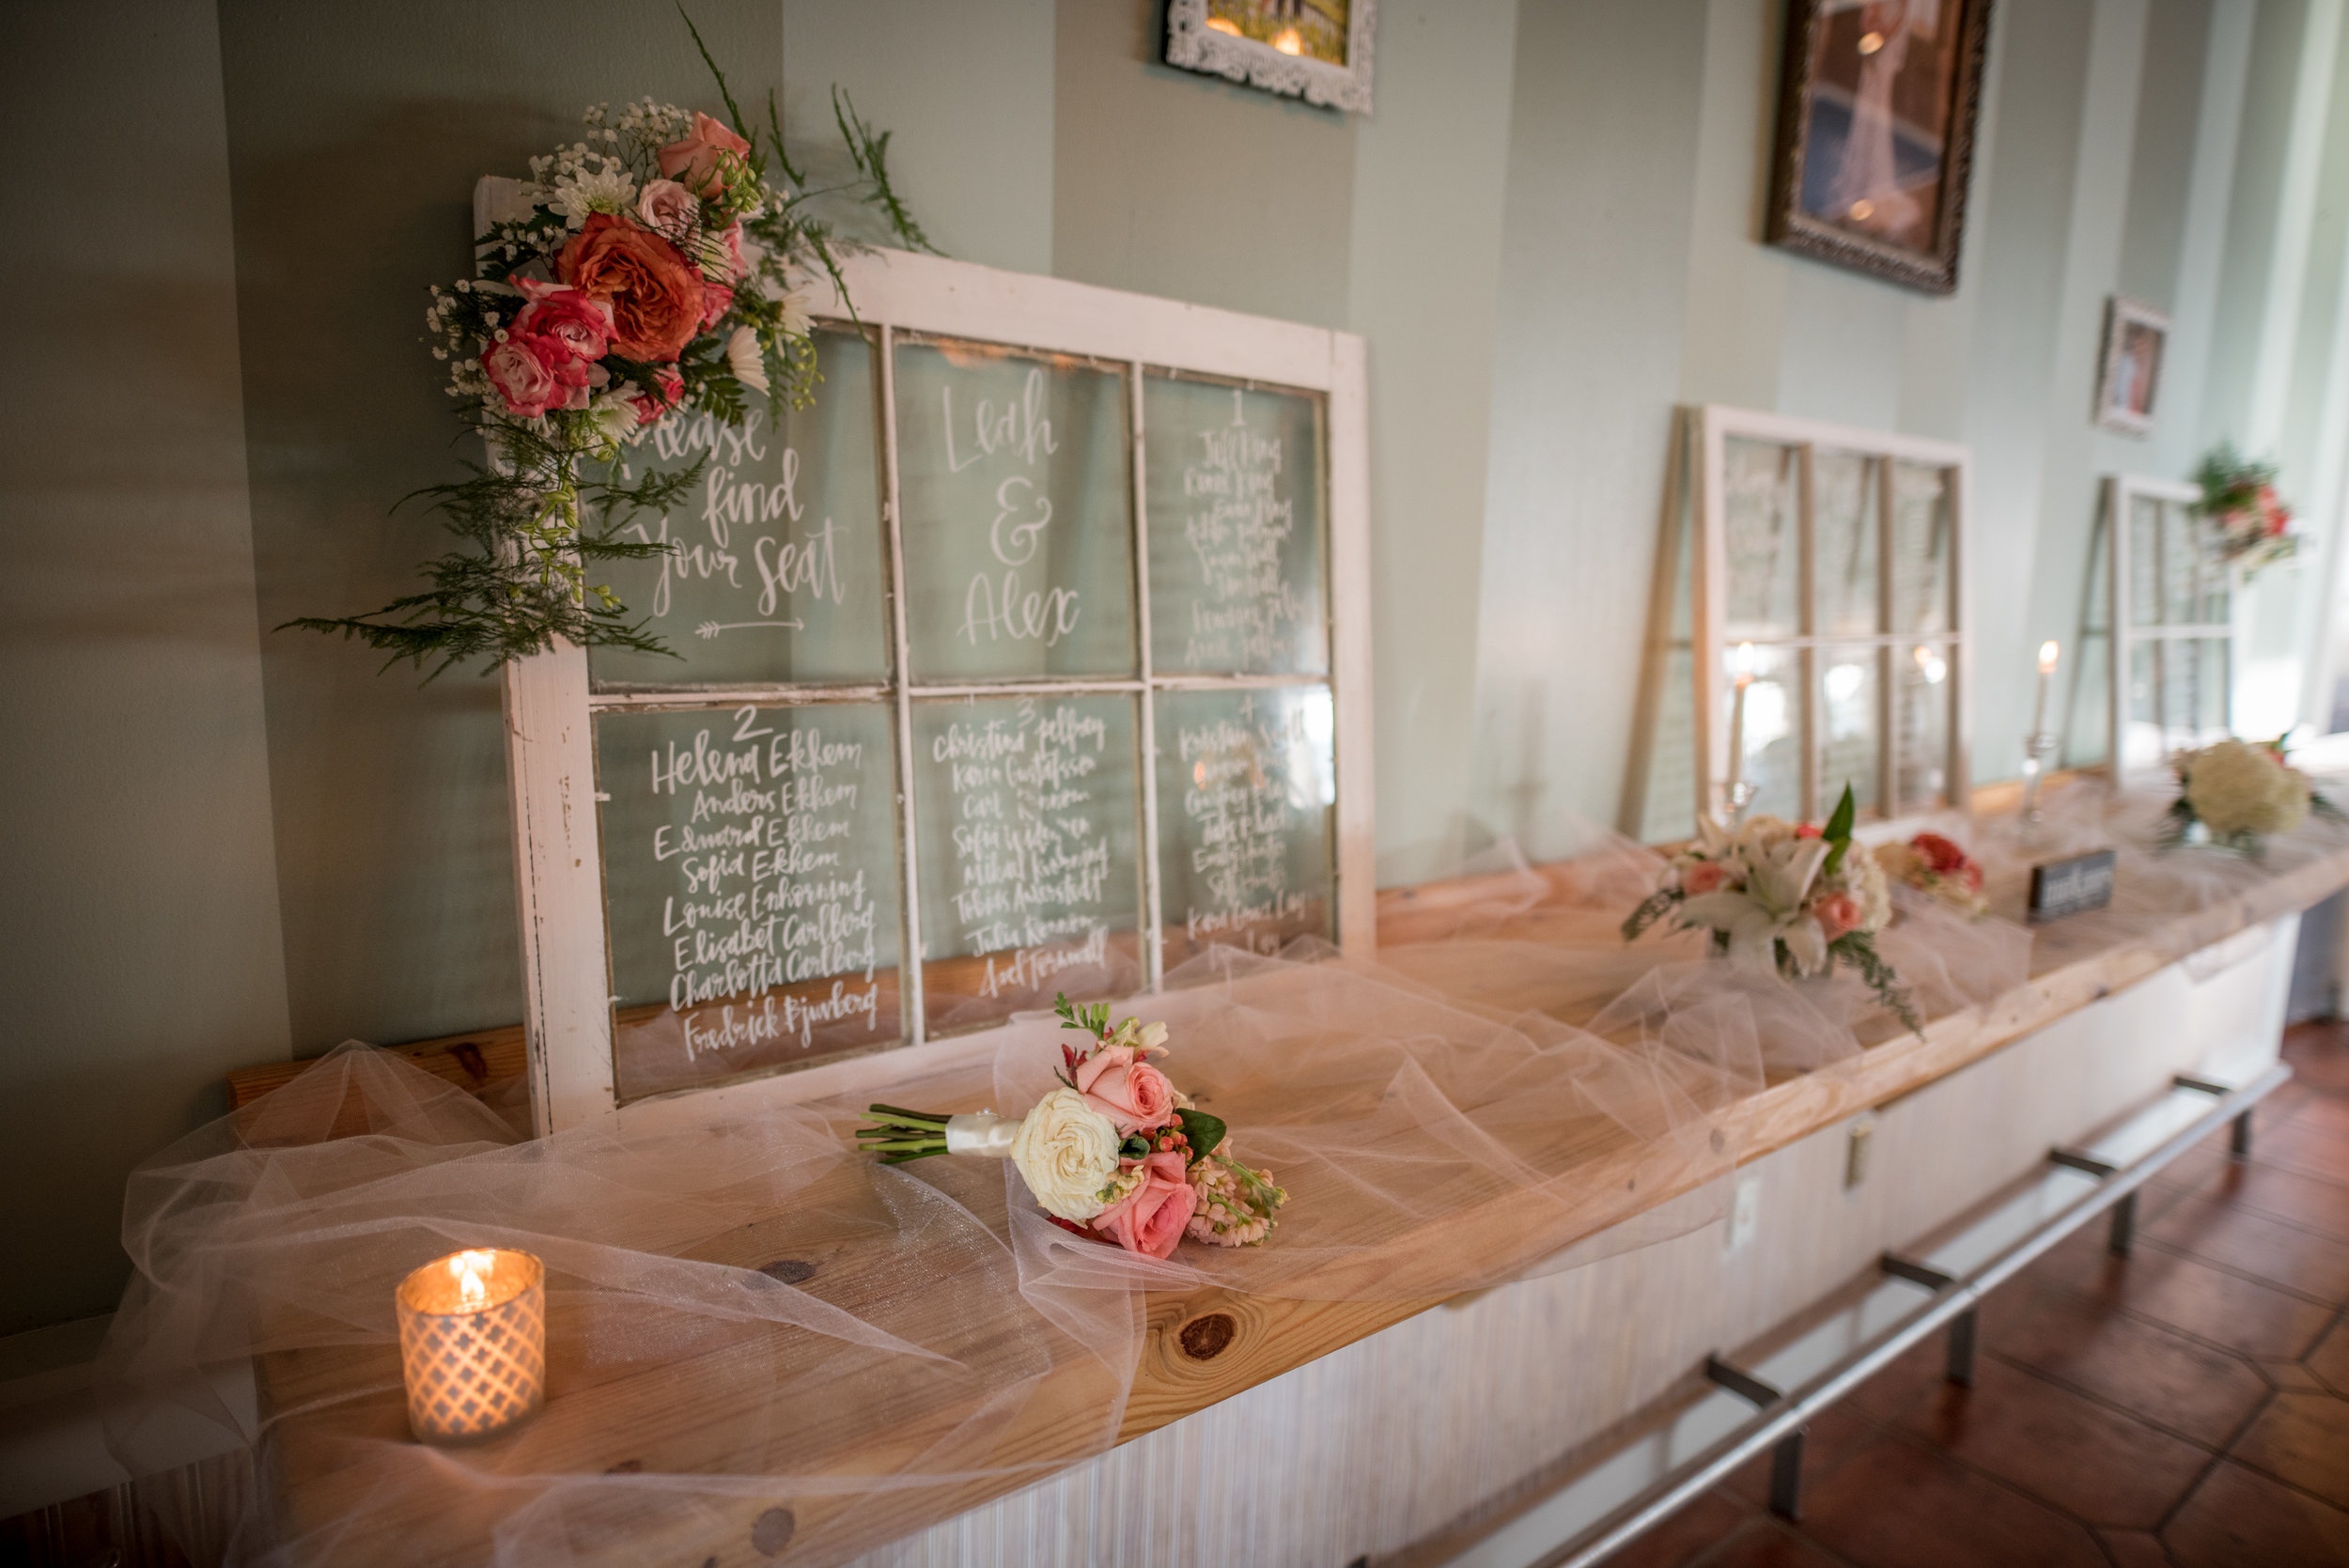  Instead of individual place cards, Leah &amp; Alex wrote their guests' seating locations on beautiful old windows. 